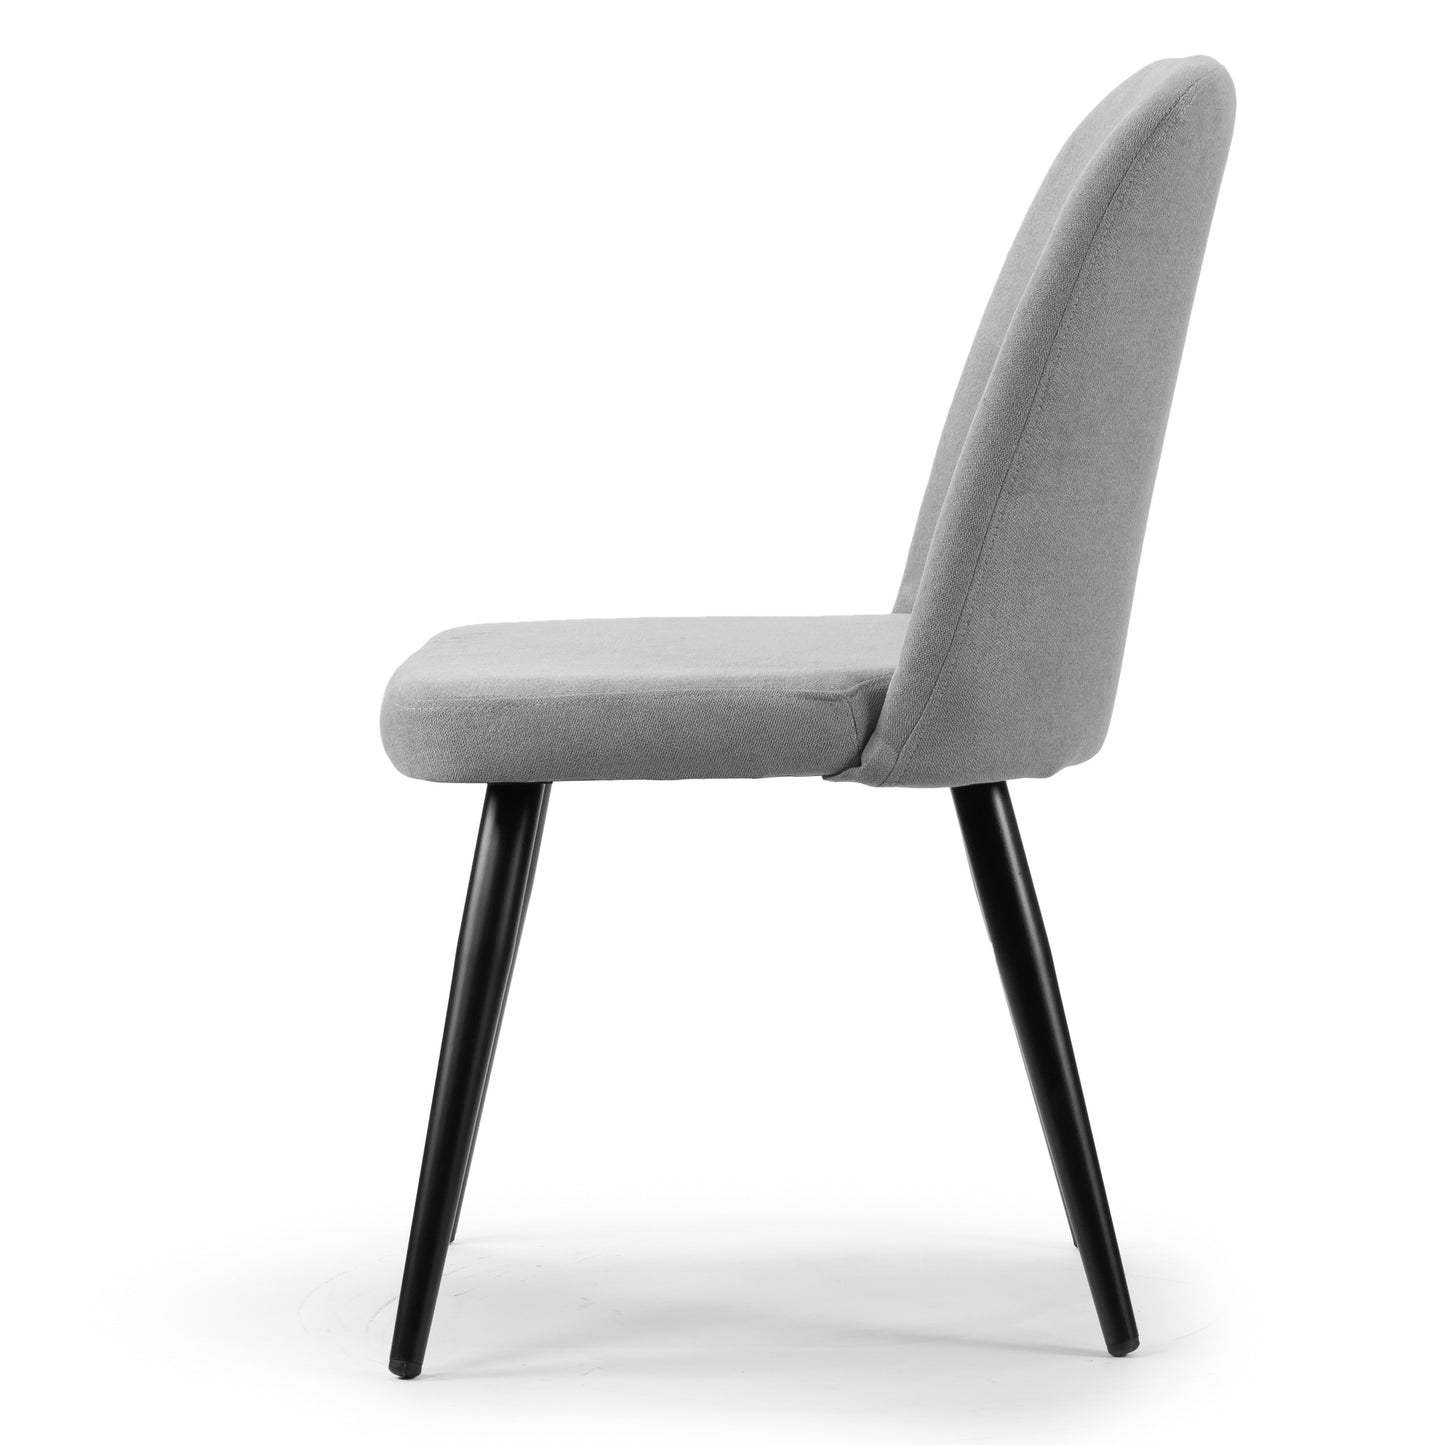 Set of 2 Amira Grey Dining Chair with Black Metal Legs